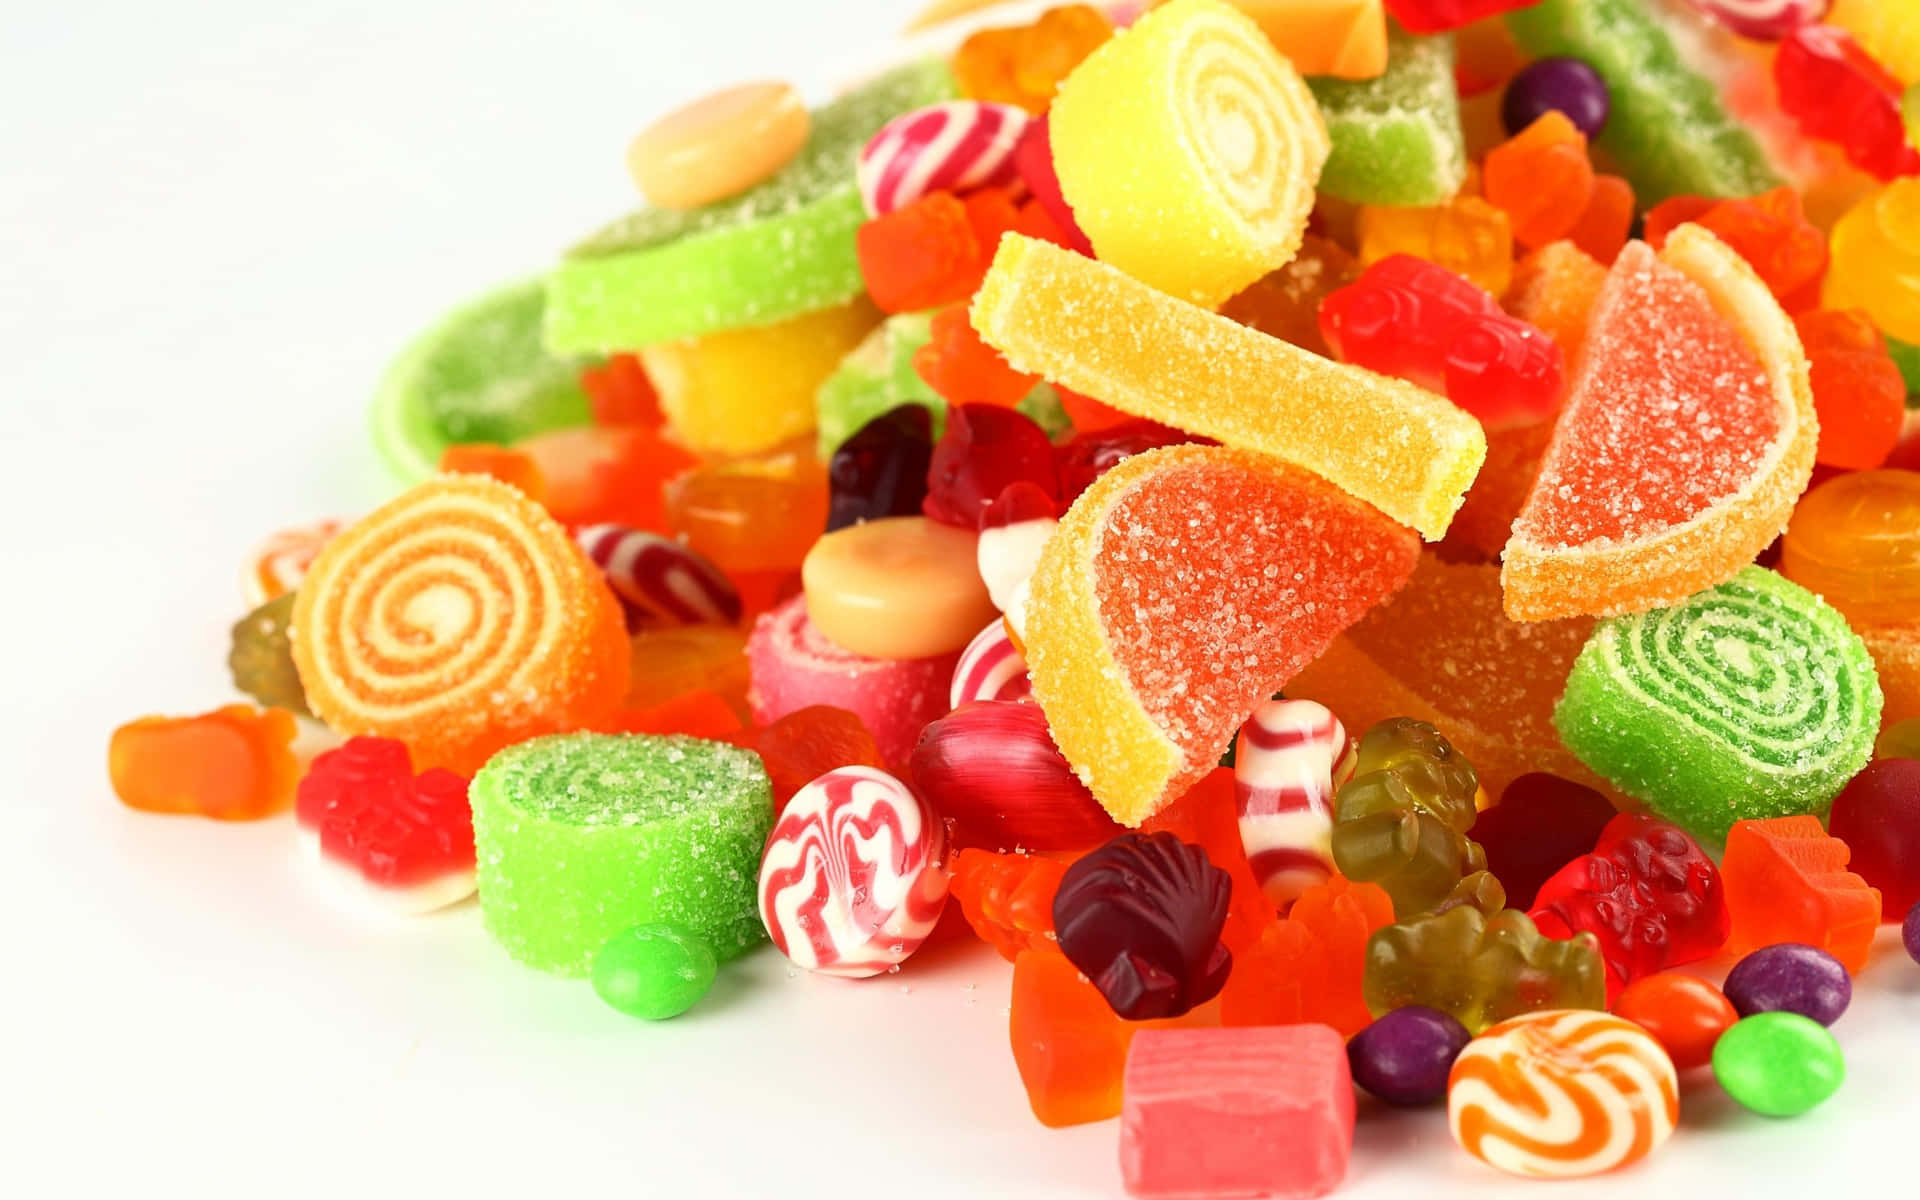 Enjoy a sweet treat with a variety of colorful candy